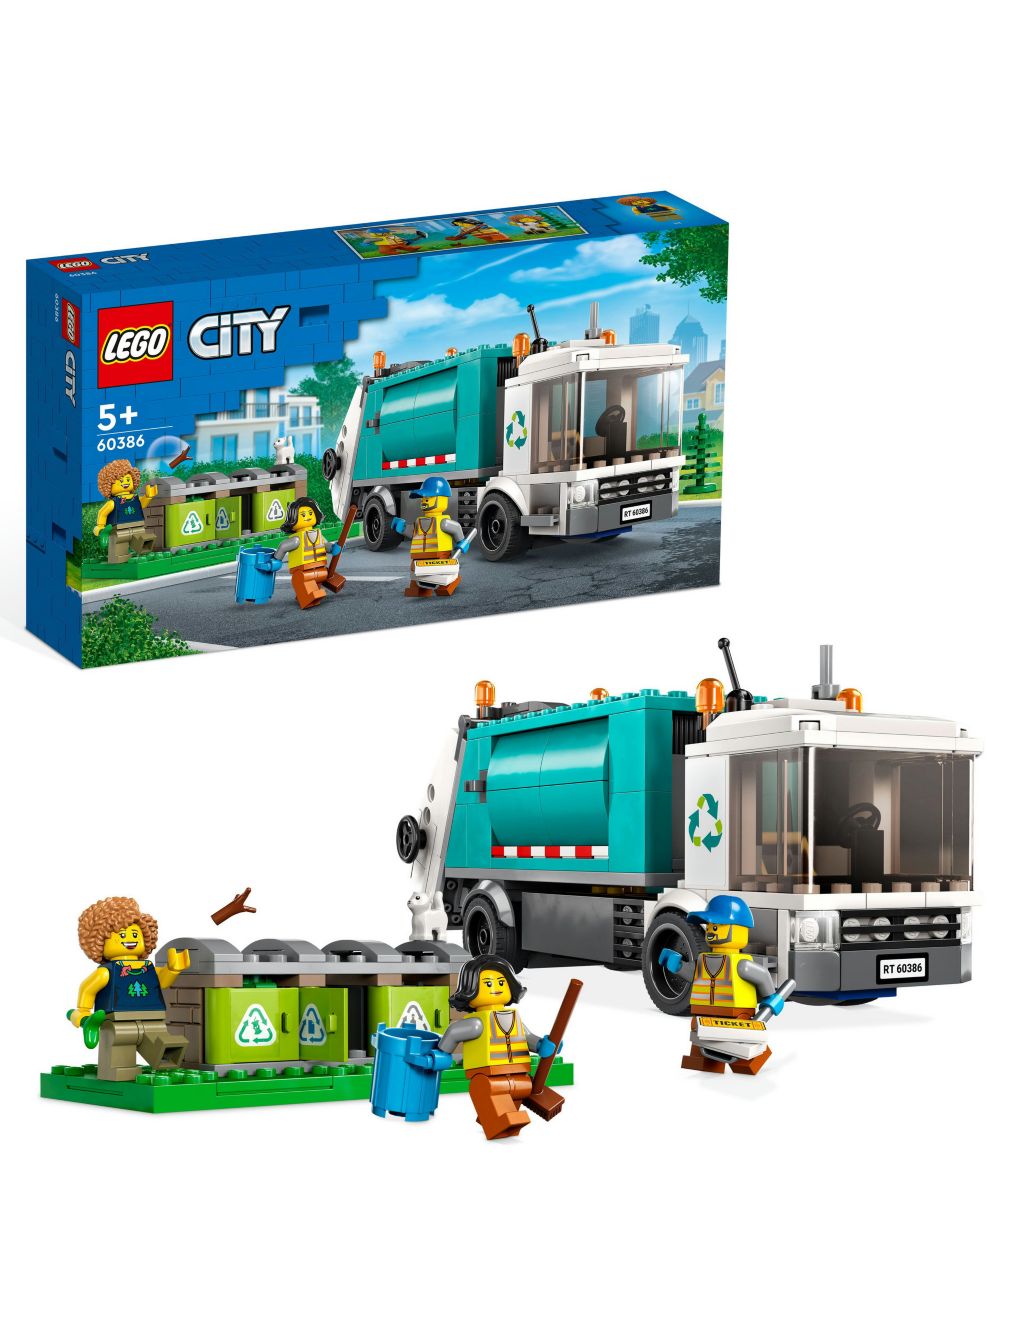 LEGO City Recycling Truck Bin Lorry Toy (5+ Yrs) image 1